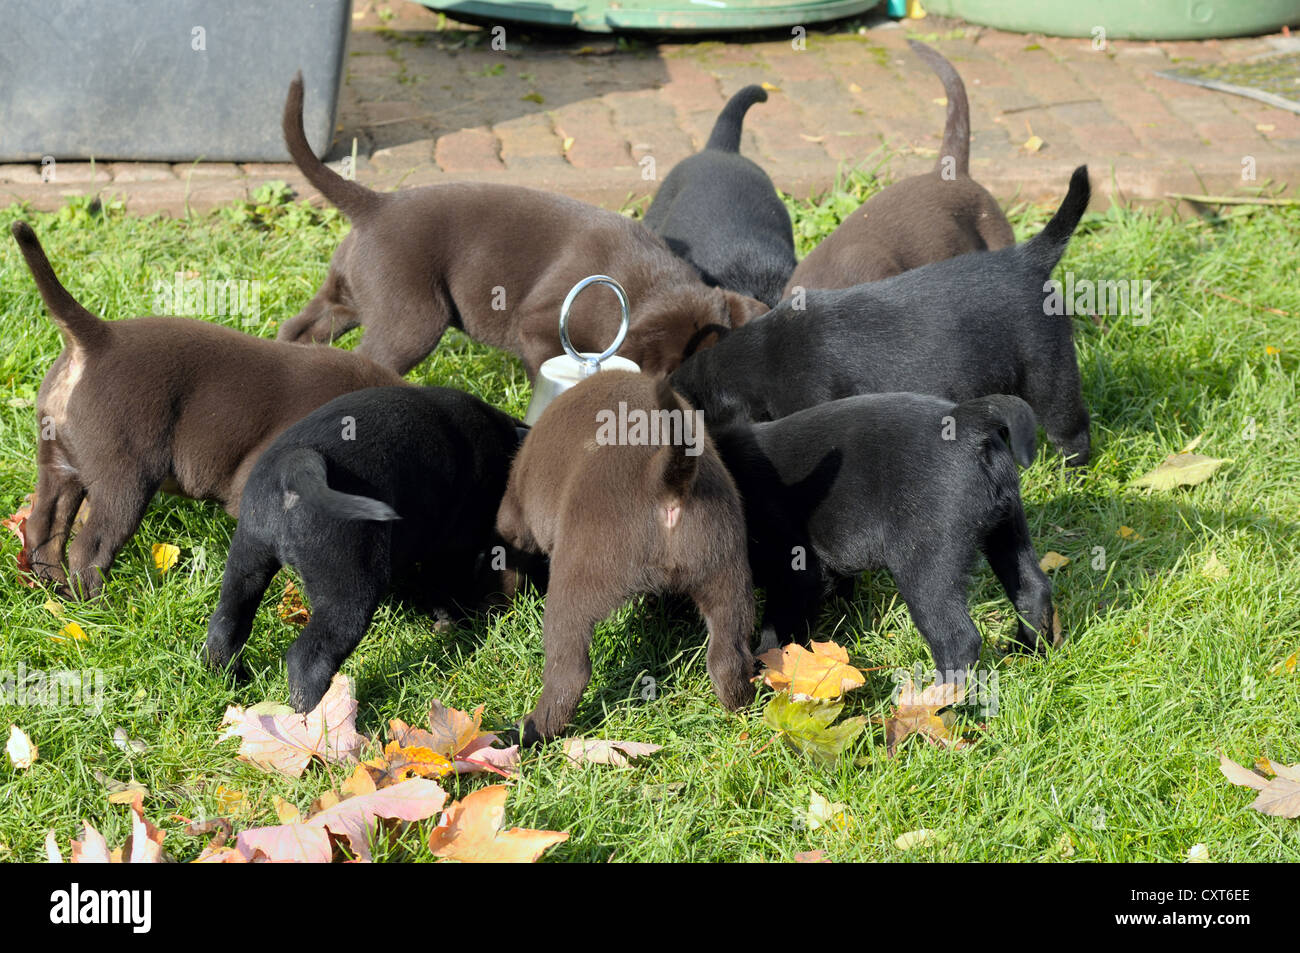 Black and brown Labrador puppies eating Stock Photo